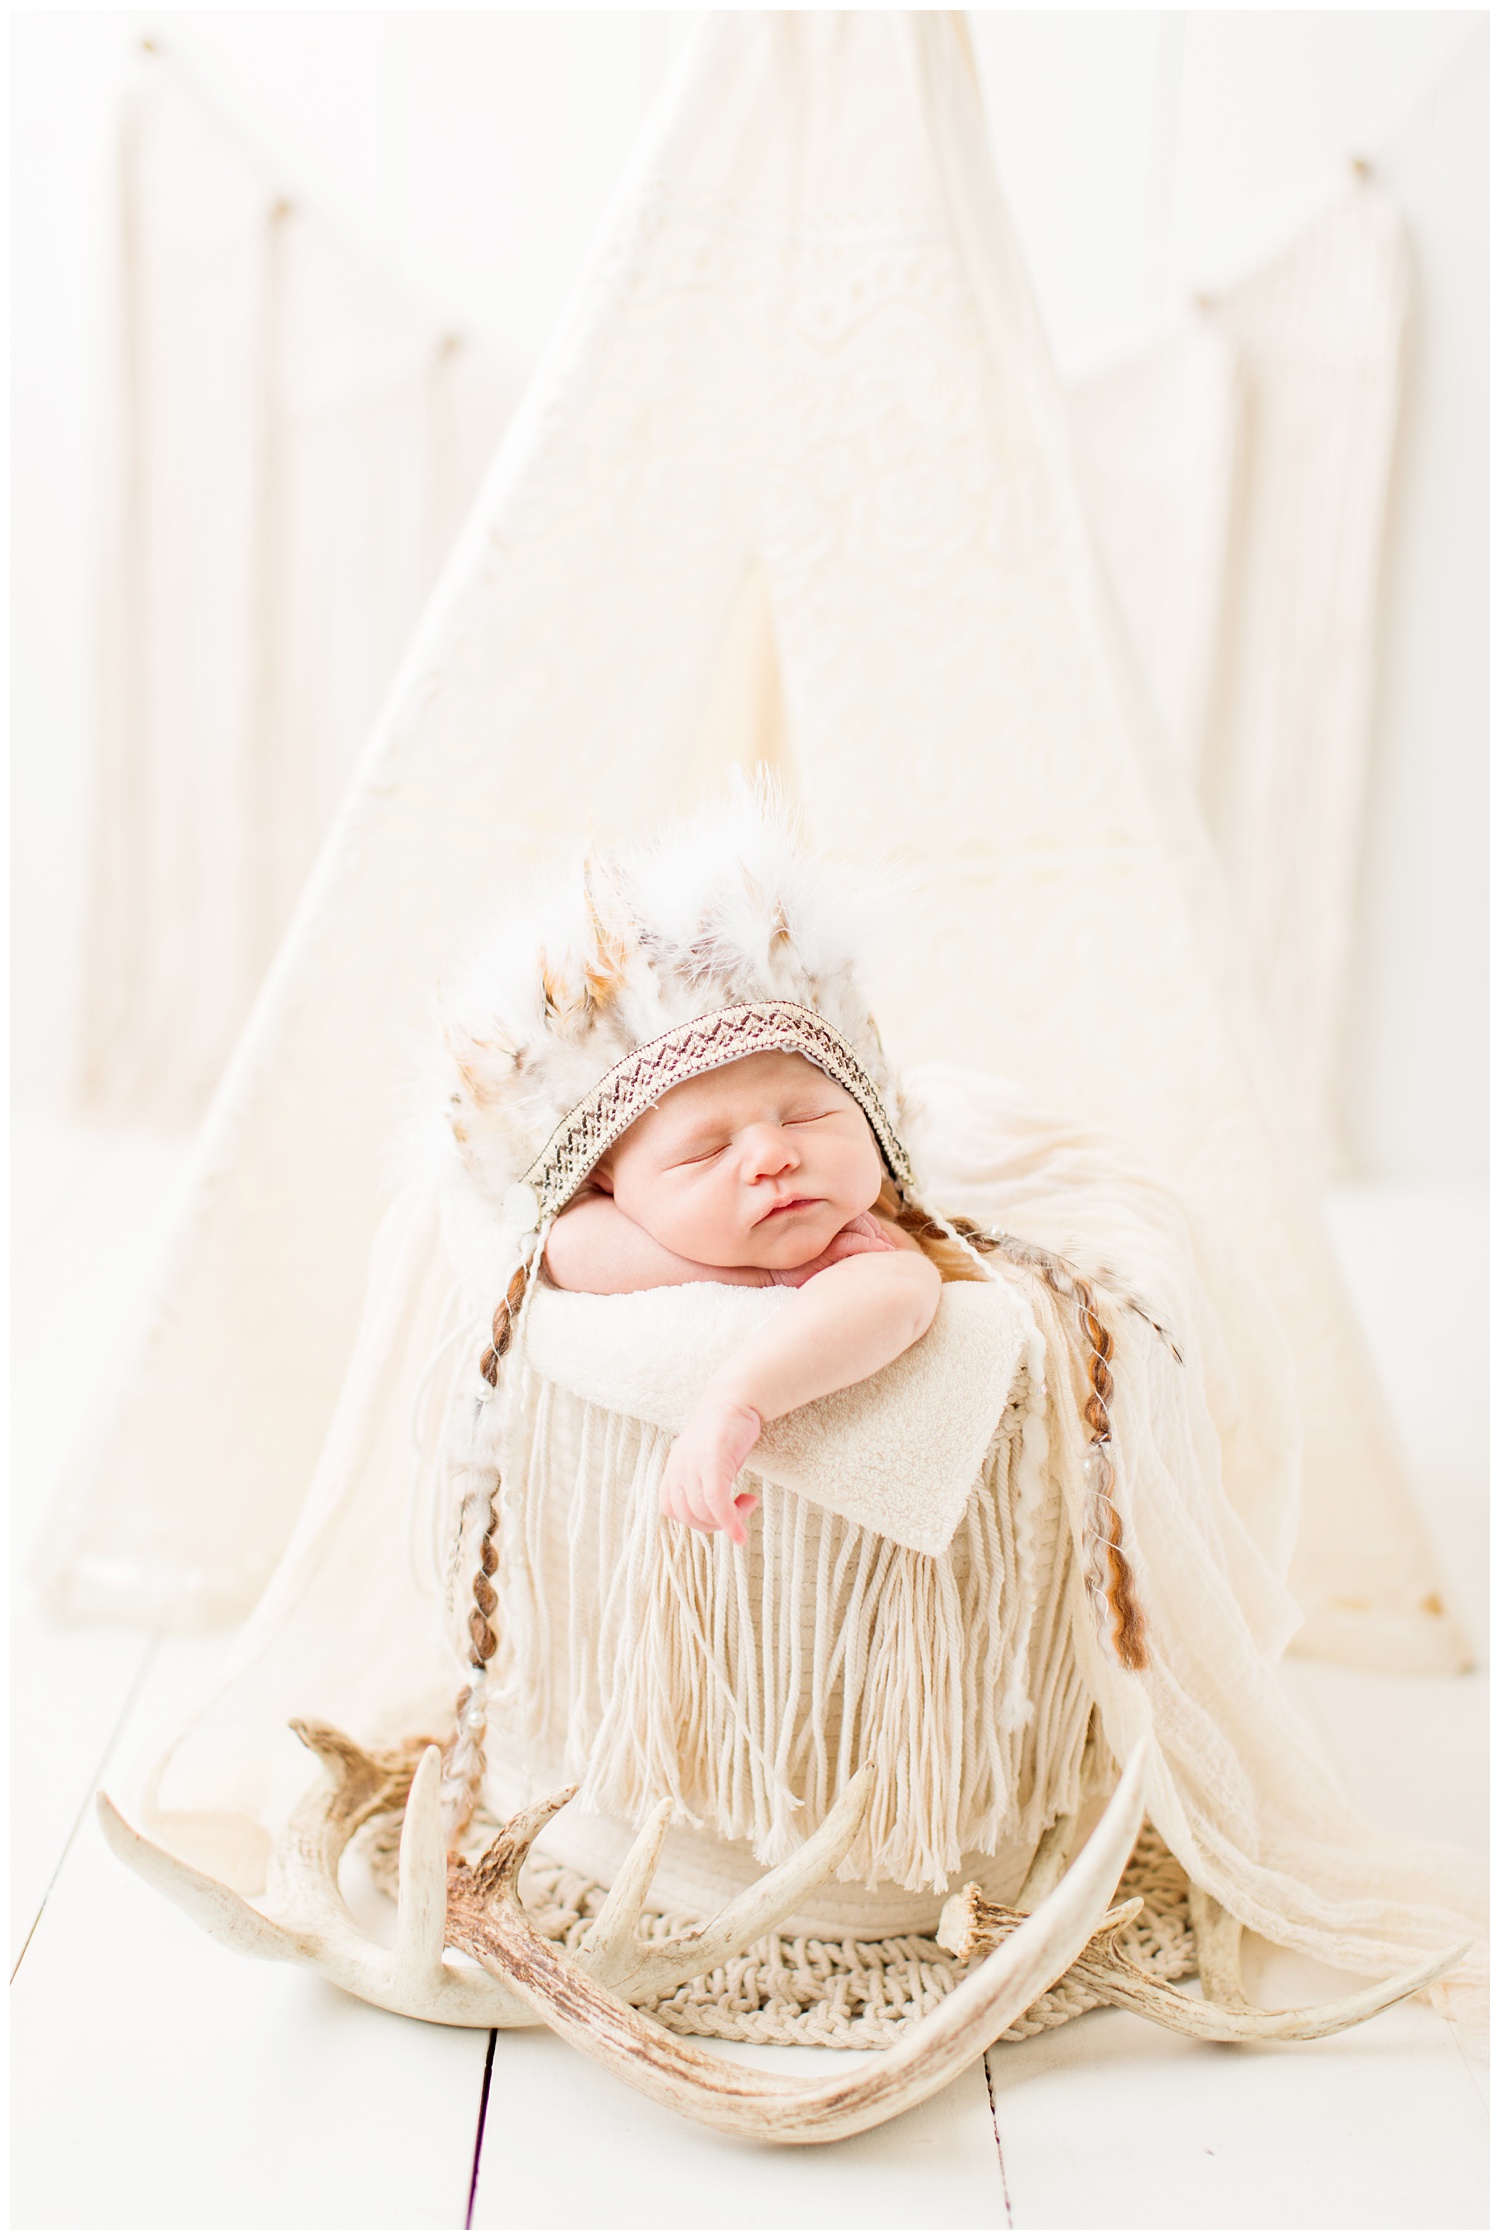 Newborn baby posing in an Indian theme photography set up wearing an Indian headdress